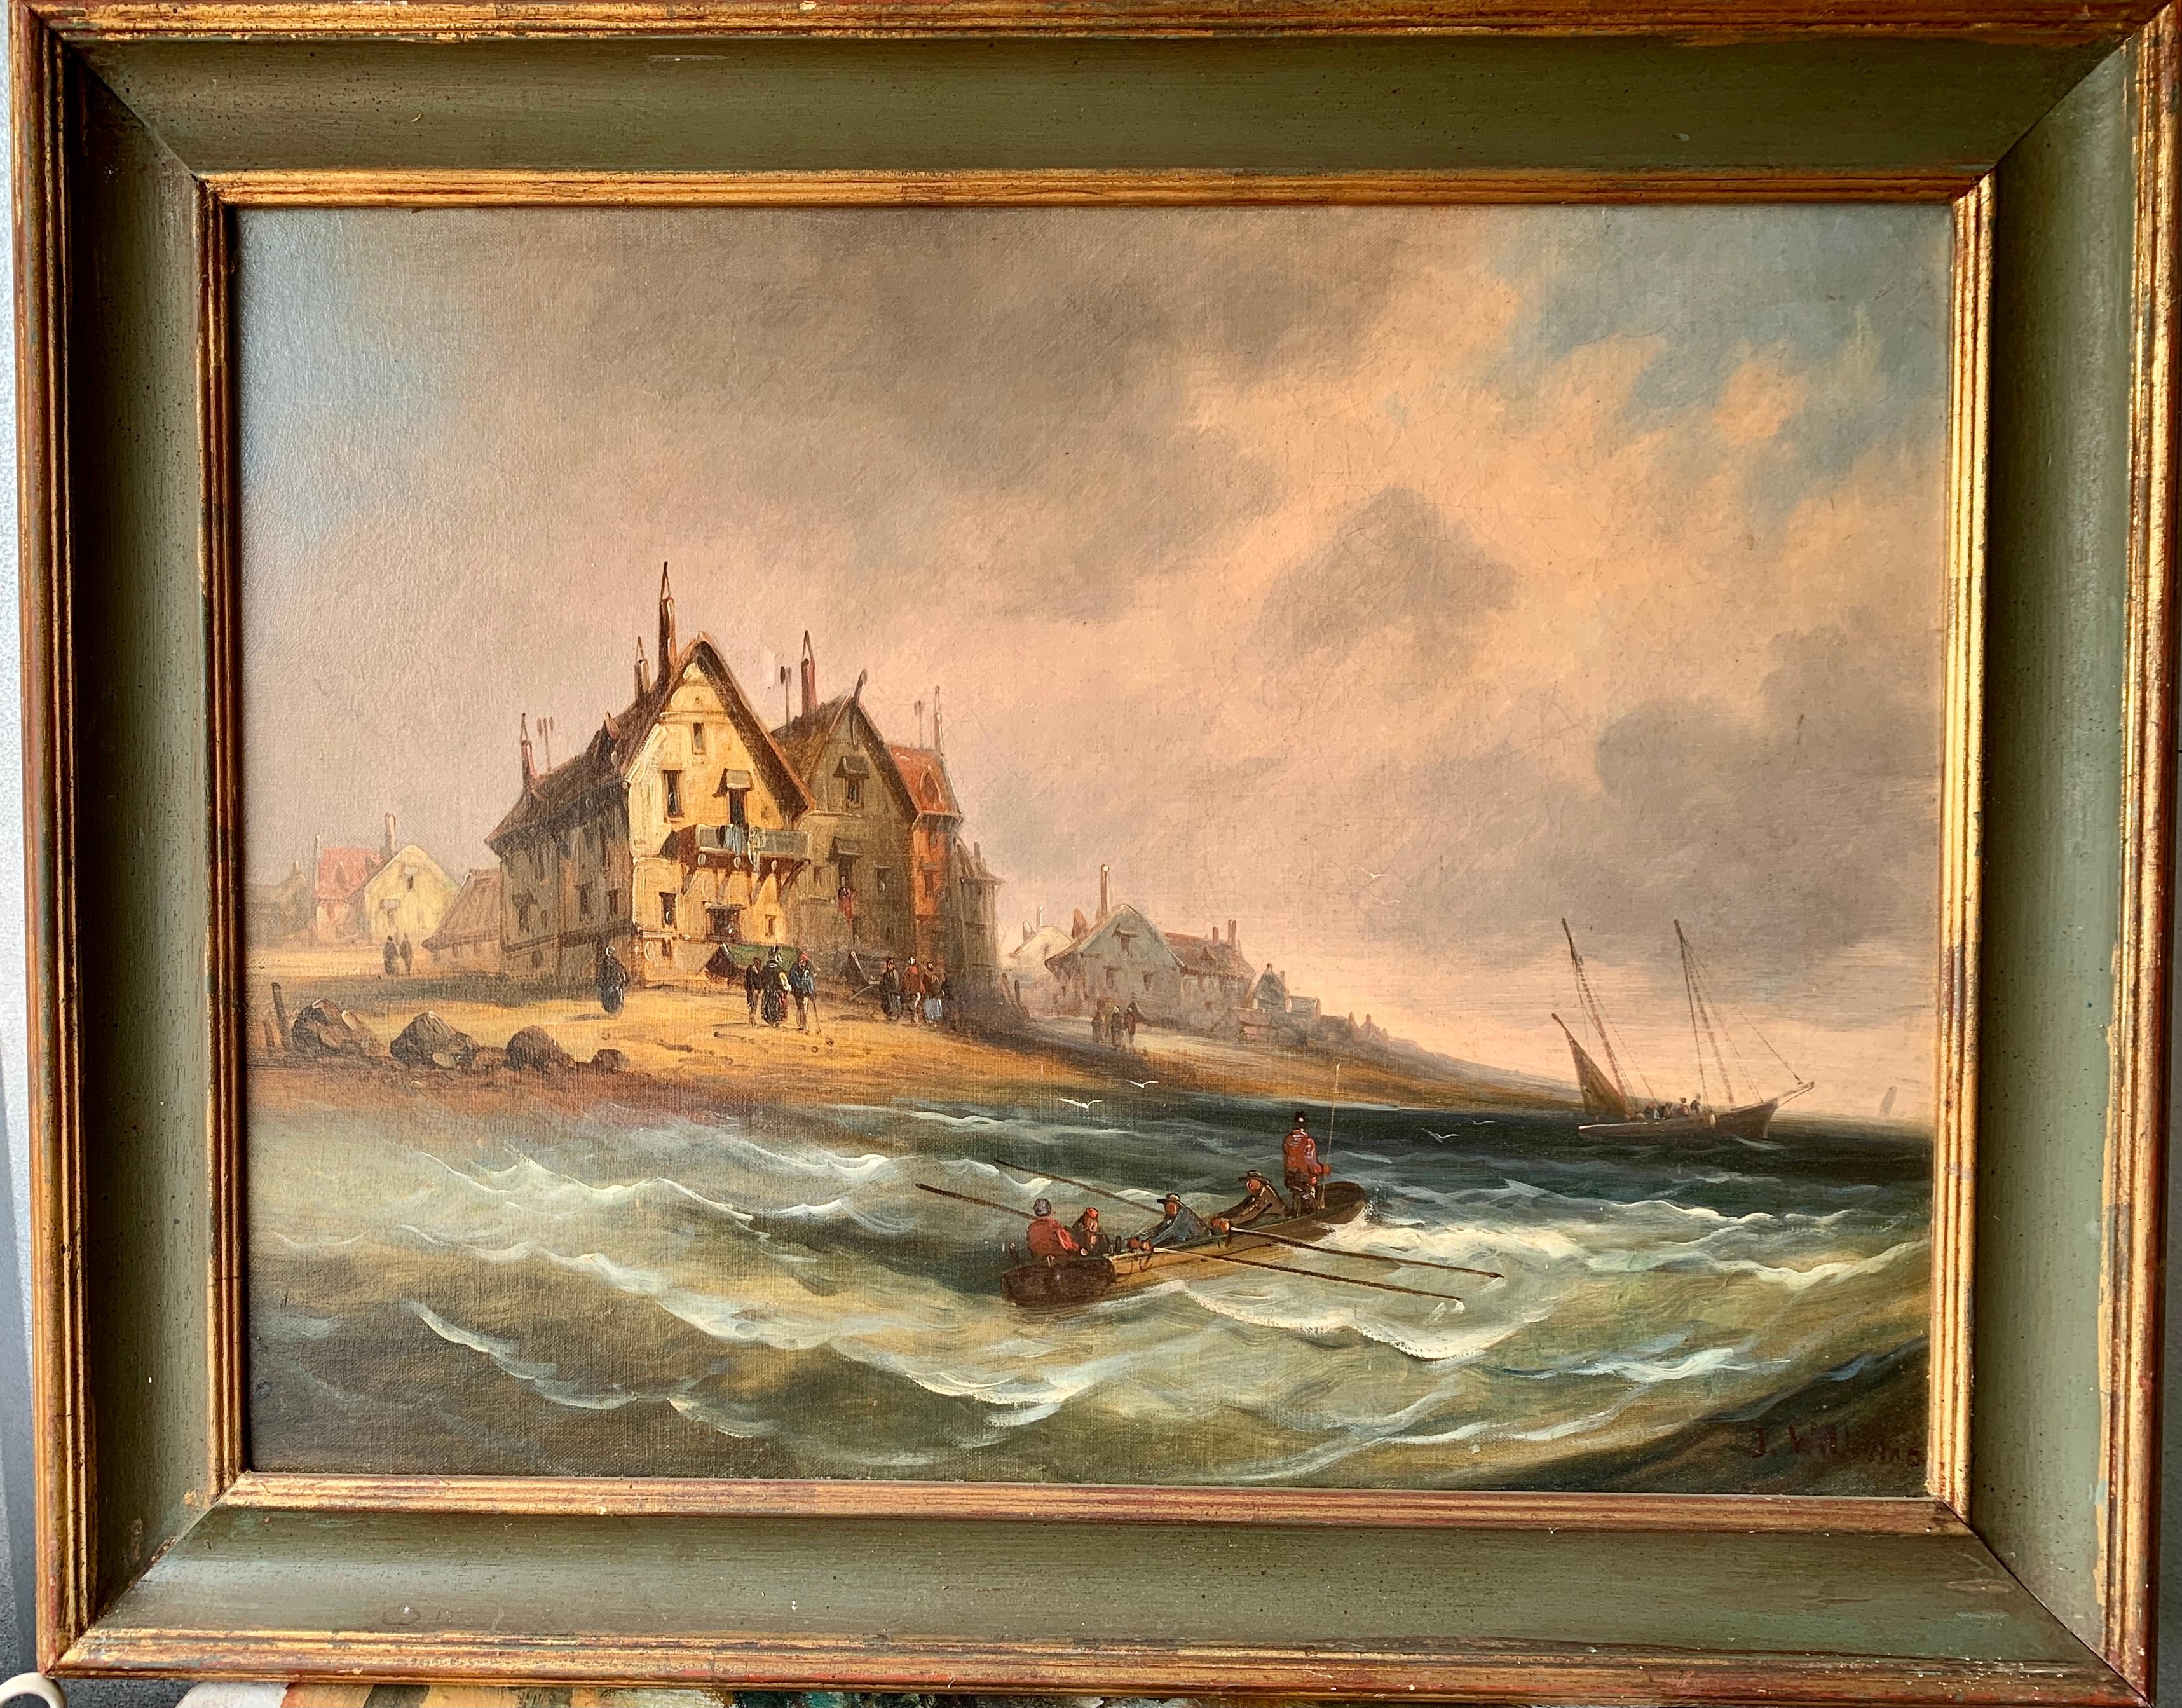 J.Willems Landscape Painting - French 19th century fishing boats off the coast with figures, houses and beach